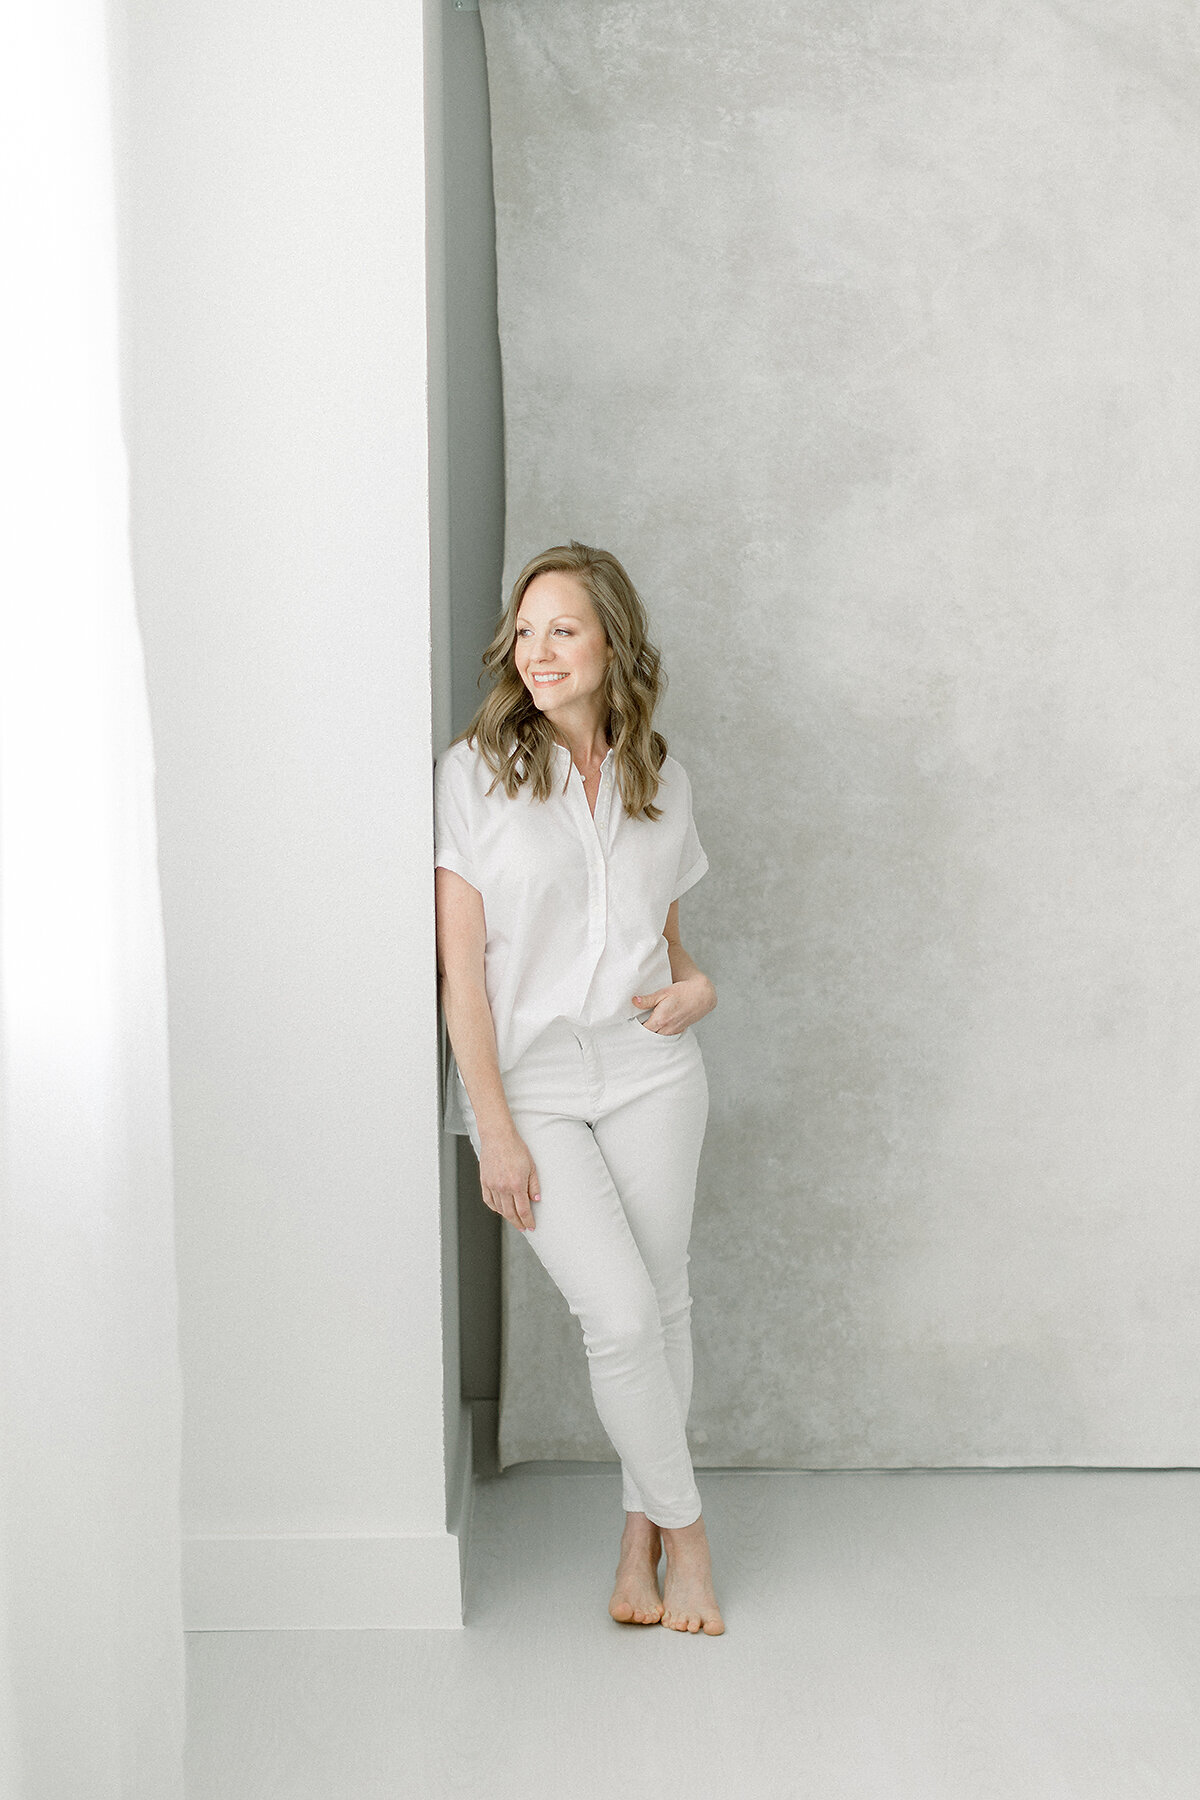 An in studio professional headshot taken of a Dallas business woman wearing a white shirt and pants as she looks out of the window and poses for her professional headshots.